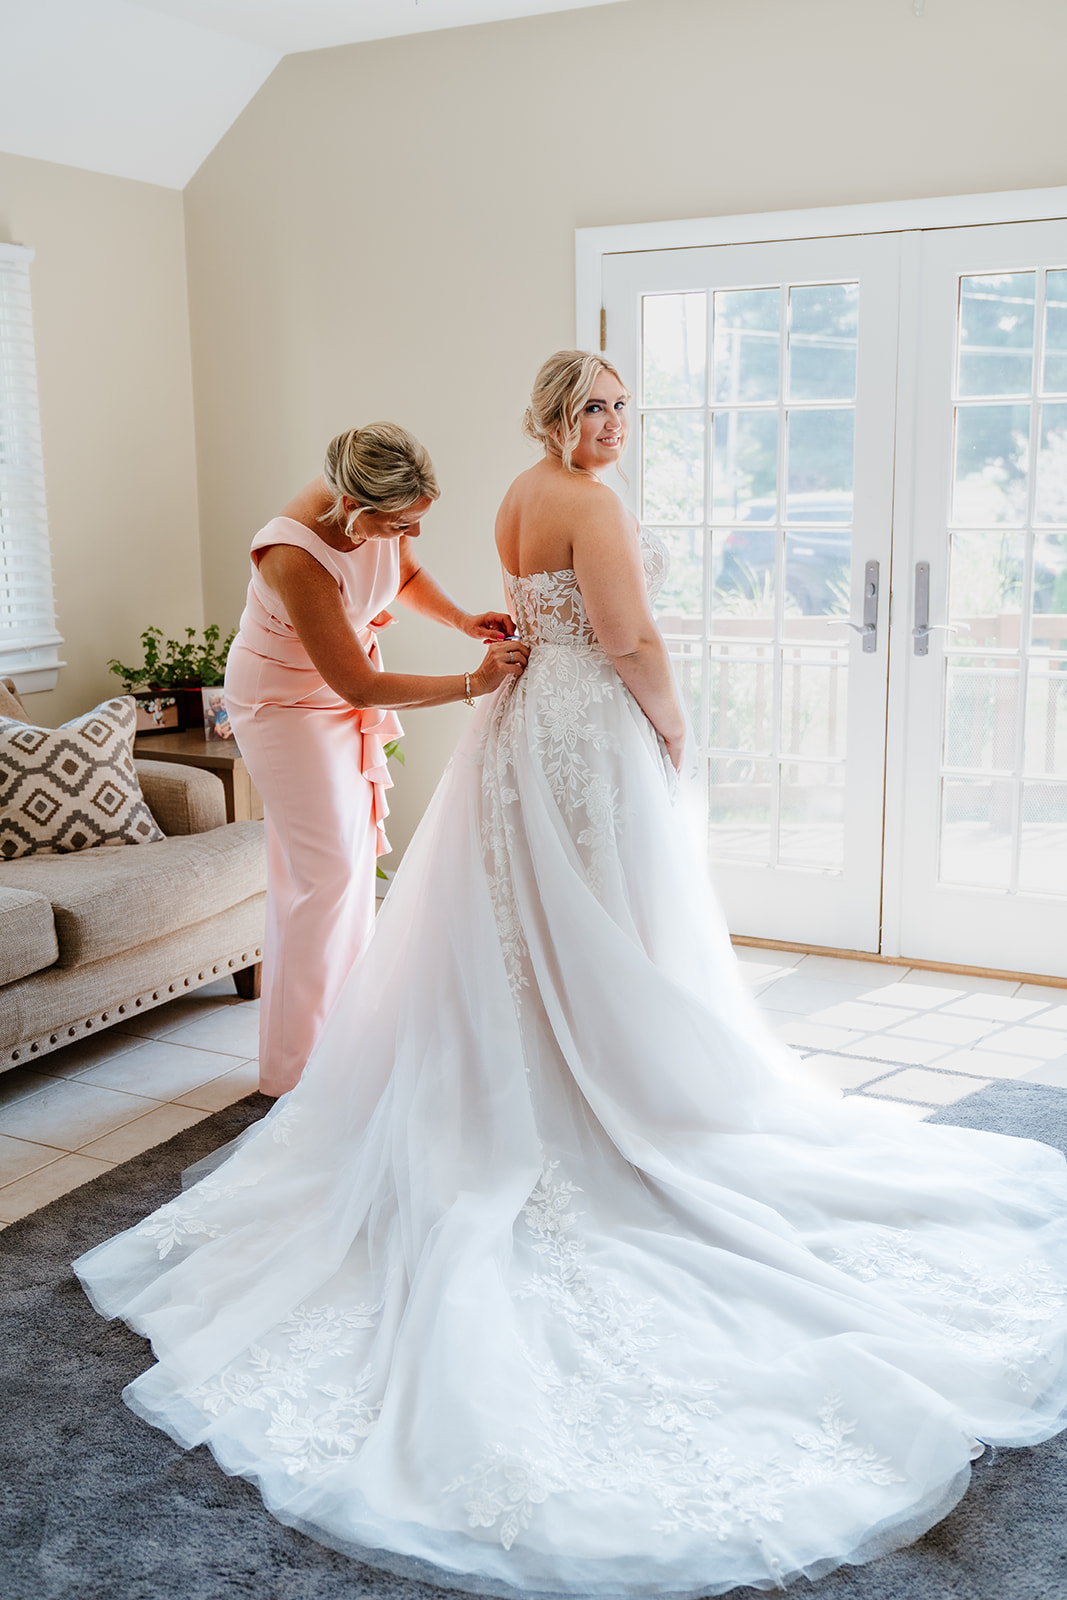 A woman in a peach dress assisting a bride in a white wedding gown, preparing for a wedding ceremony at lakeview pavilion